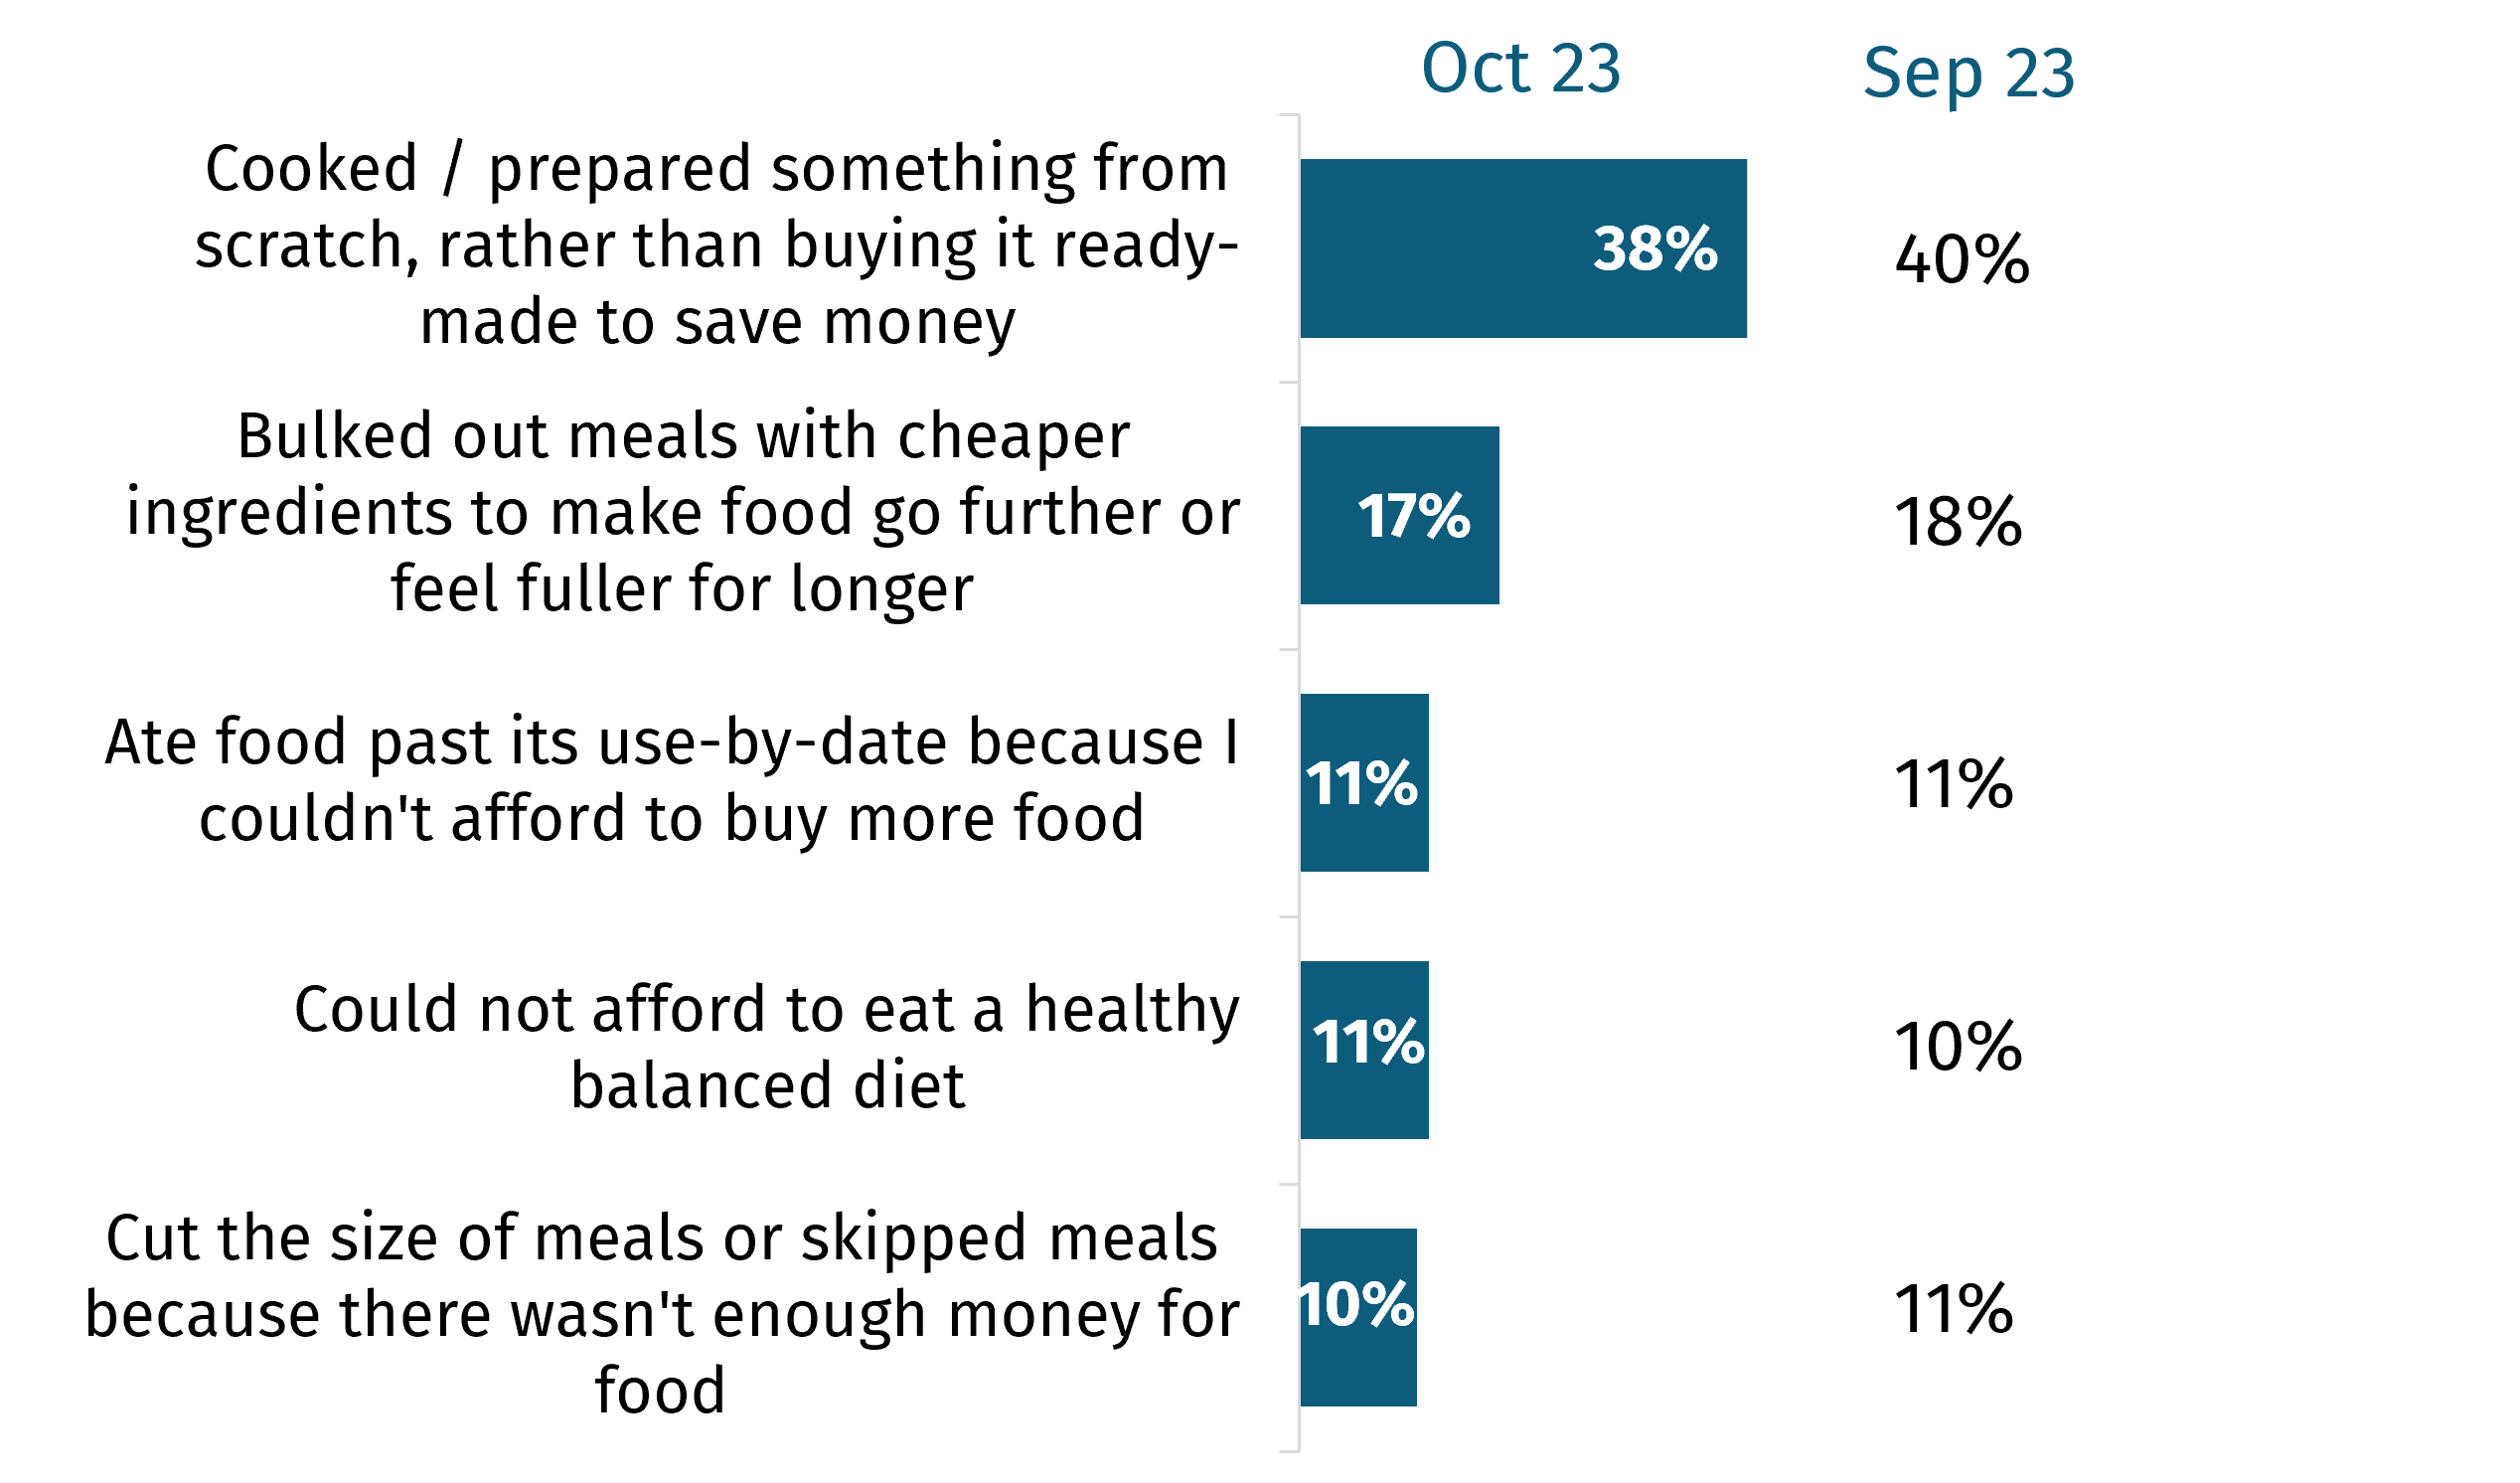 The chart shows reported cooking and eating behaviours in October. 38% cooked and prepared something from scratch and 17% bulked out meals with cheaper ingredients. 